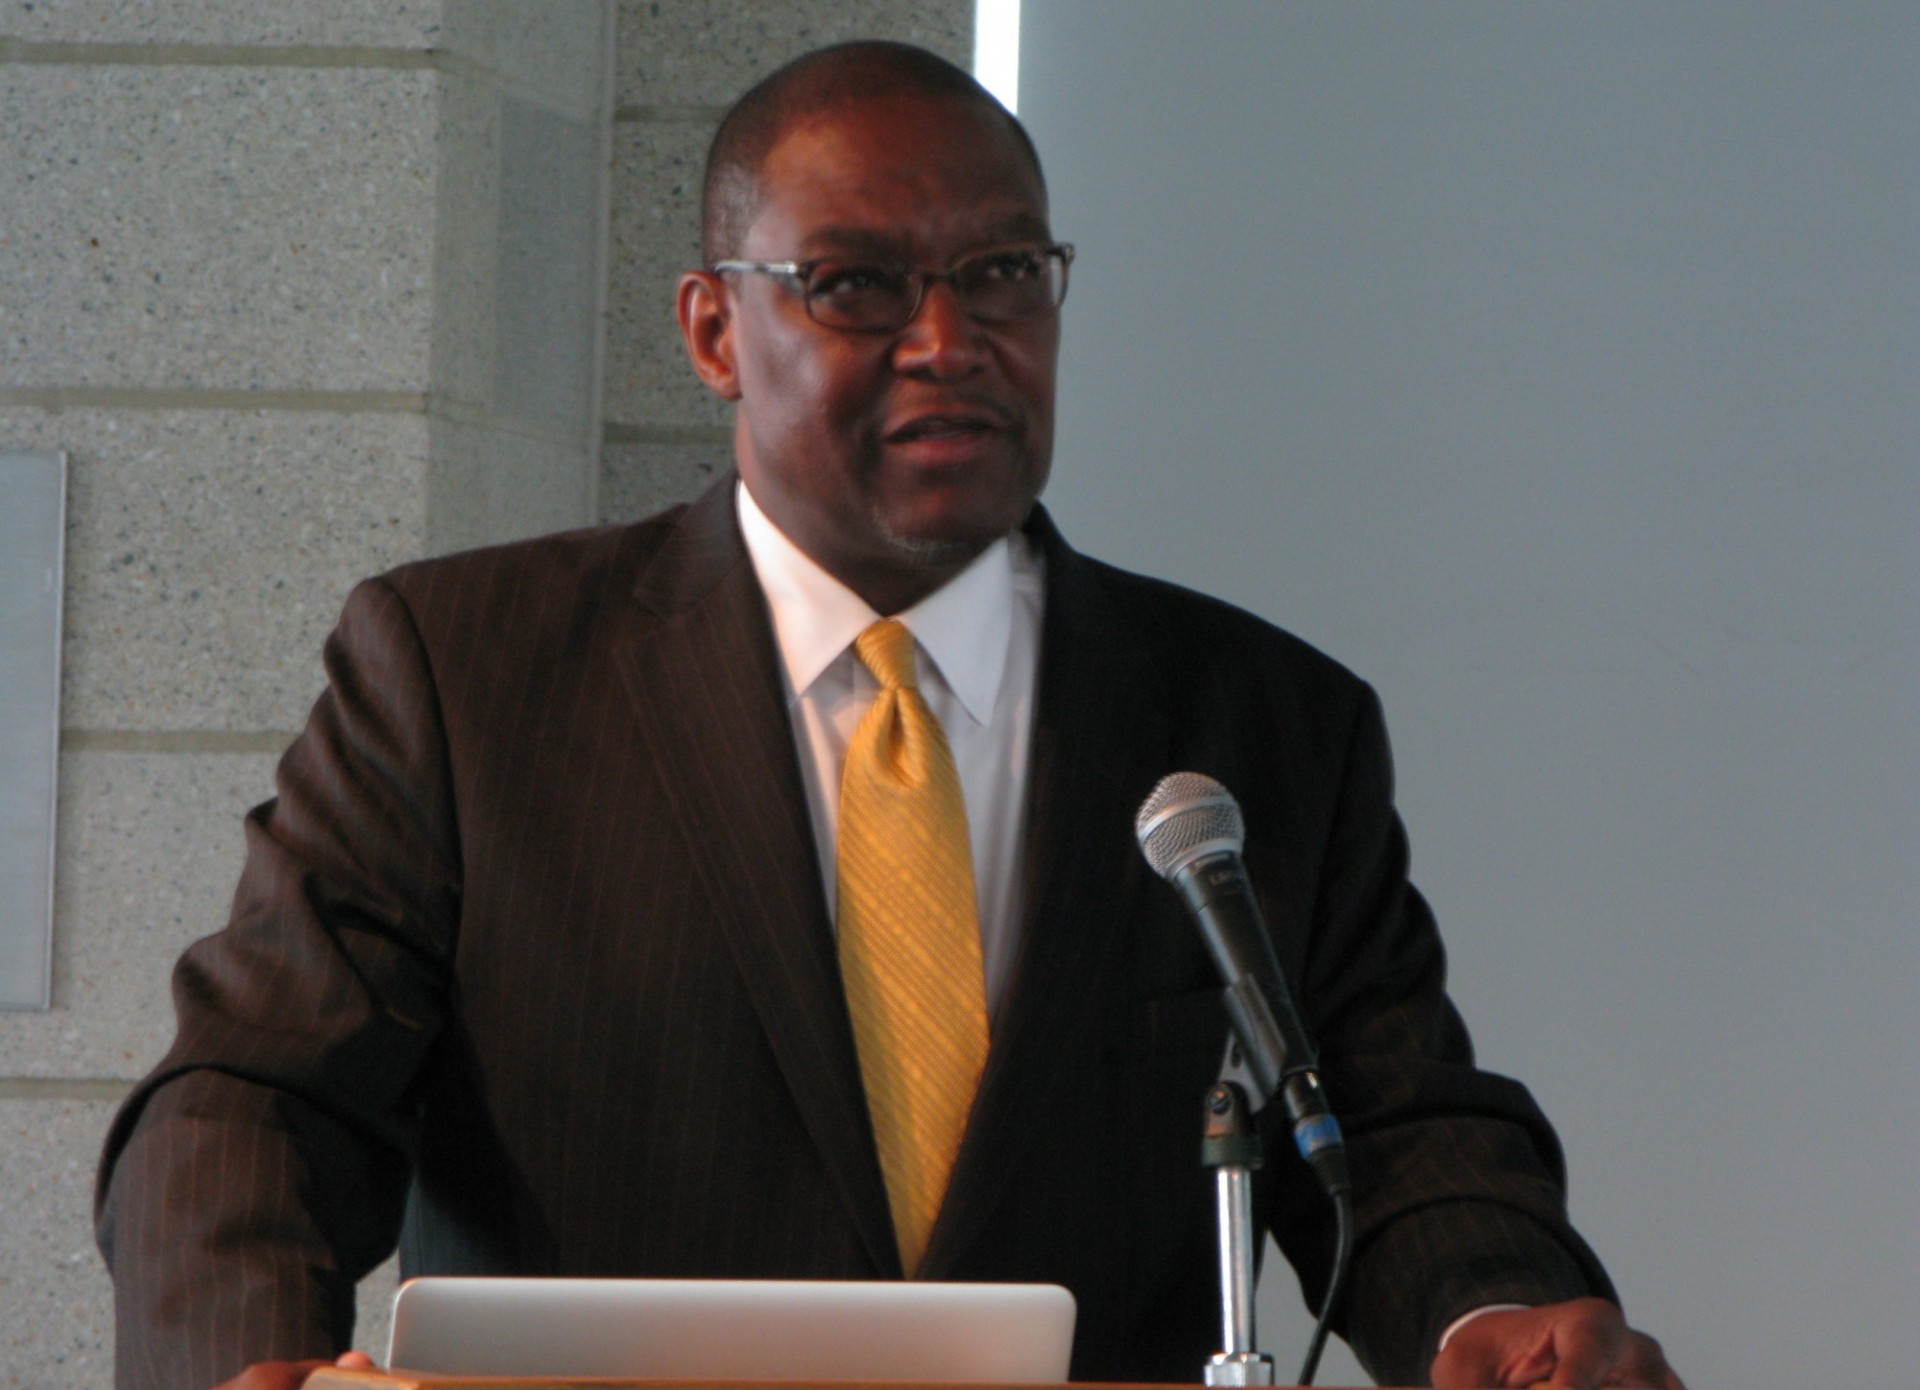 Dennis Mitchell, Vice Provost for Faculty Diversity and Inclusion